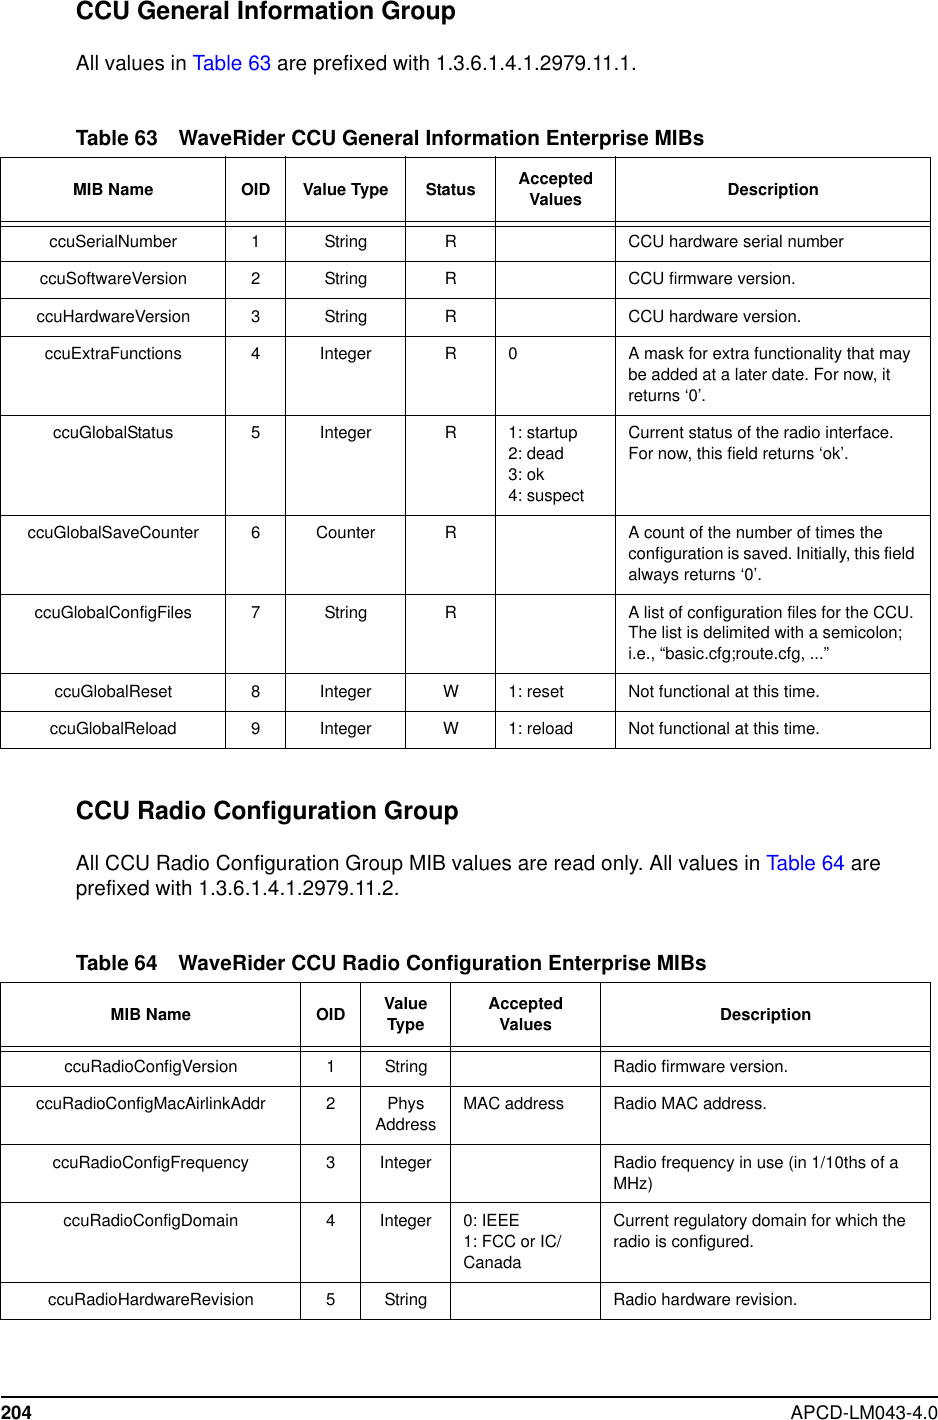 204 APCD-LM043-4.0CCU General Information GroupAll values in Table 63 are prefixed with 1.3.6.1.4.1.2979.11.1.Table 63 WaveRider CCU General Information Enterprise MIBsCCU Radio Configuration GroupAll CCU Radio Configuration Group MIB values are read only. All values in Table 64 areprefixed with 1.3.6.1.4.1.2979.11.2.Table 64 WaveRider CCU Radio Configuration Enterprise MIBsMIB Name OID Value Type Status AcceptedValues DescriptionccuSerialNumber 1 String R CCU hardware serial numberccuSoftwareVersion 2String RCCU firmware version.ccuHardwareVersion 3String RCCU hardware version.ccuExtraFunctions 4Integer R 0 A mask for extra functionality that maybe added at a later date. For now, itreturns ‘0’.ccuGlobalStatus 5Integer R1: startup2: dead3: ok4: suspectCurrent status of the radio interface.For now, this field returns ‘ok’.ccuGlobalSaveCounter 6Counter RA count of the number of times theconfiguration is saved. Initially, this fieldalways returns ‘0’.ccuGlobalConfigFiles 7String RA list of configuration files for the CCU.The list is delimited with a semicolon;i.e., “basic.cfg;route.cfg, ...”ccuGlobalReset 8Integer W1: reset Not functional at this time.ccuGlobalReload 9Integer W1: reload Not functional at this time.MIB Name OID ValueType AcceptedValues DescriptionccuRadioConfigVersion 1 String Radio firmware version.ccuRadioConfigMacAirlinkAddr 2PhysAddressMAC address Radio MAC address.ccuRadioConfigFrequency 3Integer Radio frequency in use (in 1/10ths of aMHz)ccuRadioConfigDomain 4Integer 0: IEEE1: FCC or IC/CanadaCurrent regulatory domain for which theradio is configured.ccuRadioHardwareRevision 5String Radio hardware revision.